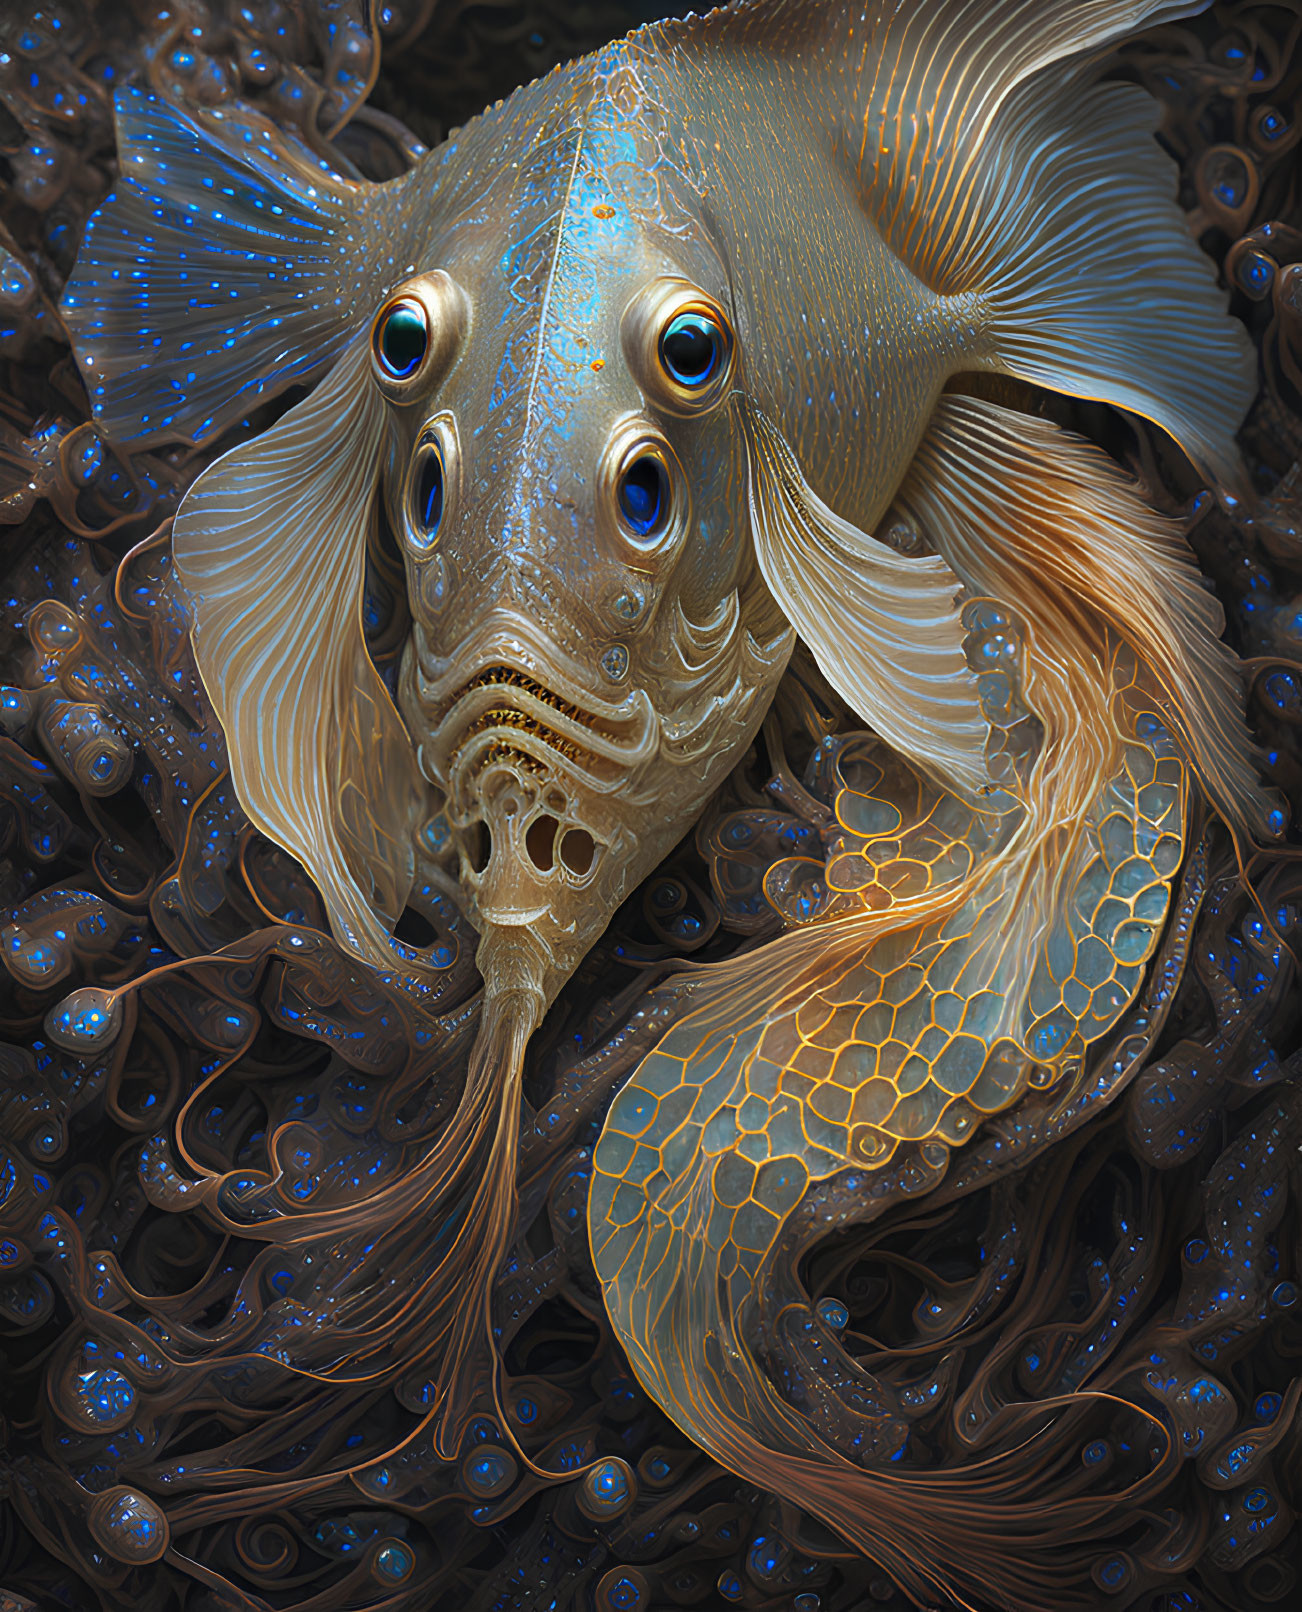 Intricate gold and blue patterned surreal fish with multiple eyes